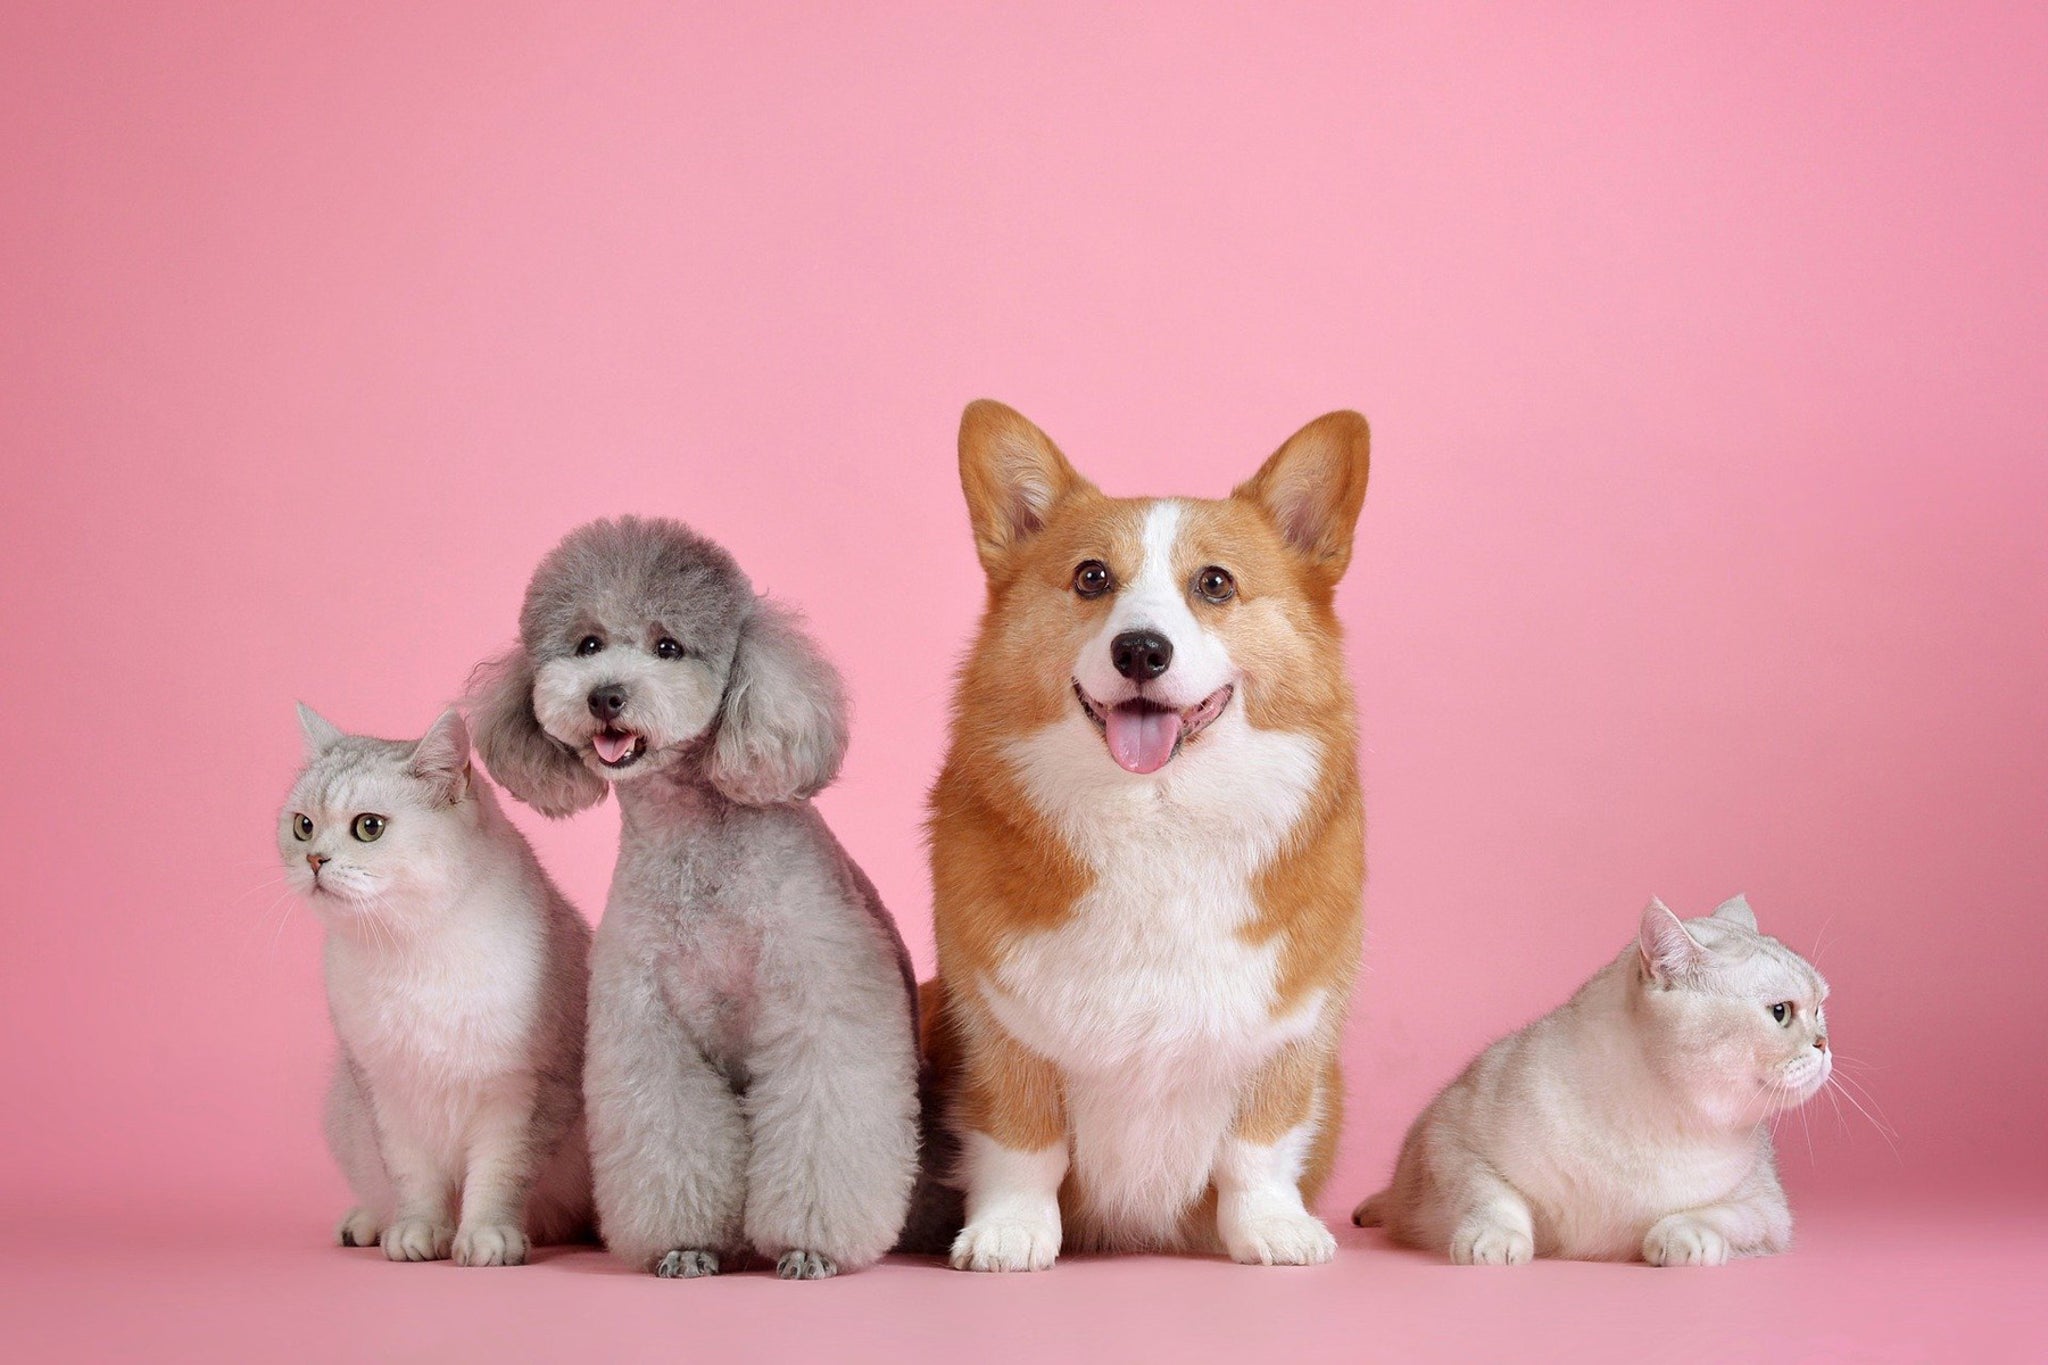 085_dogs_and_cats_pink_background.jpg